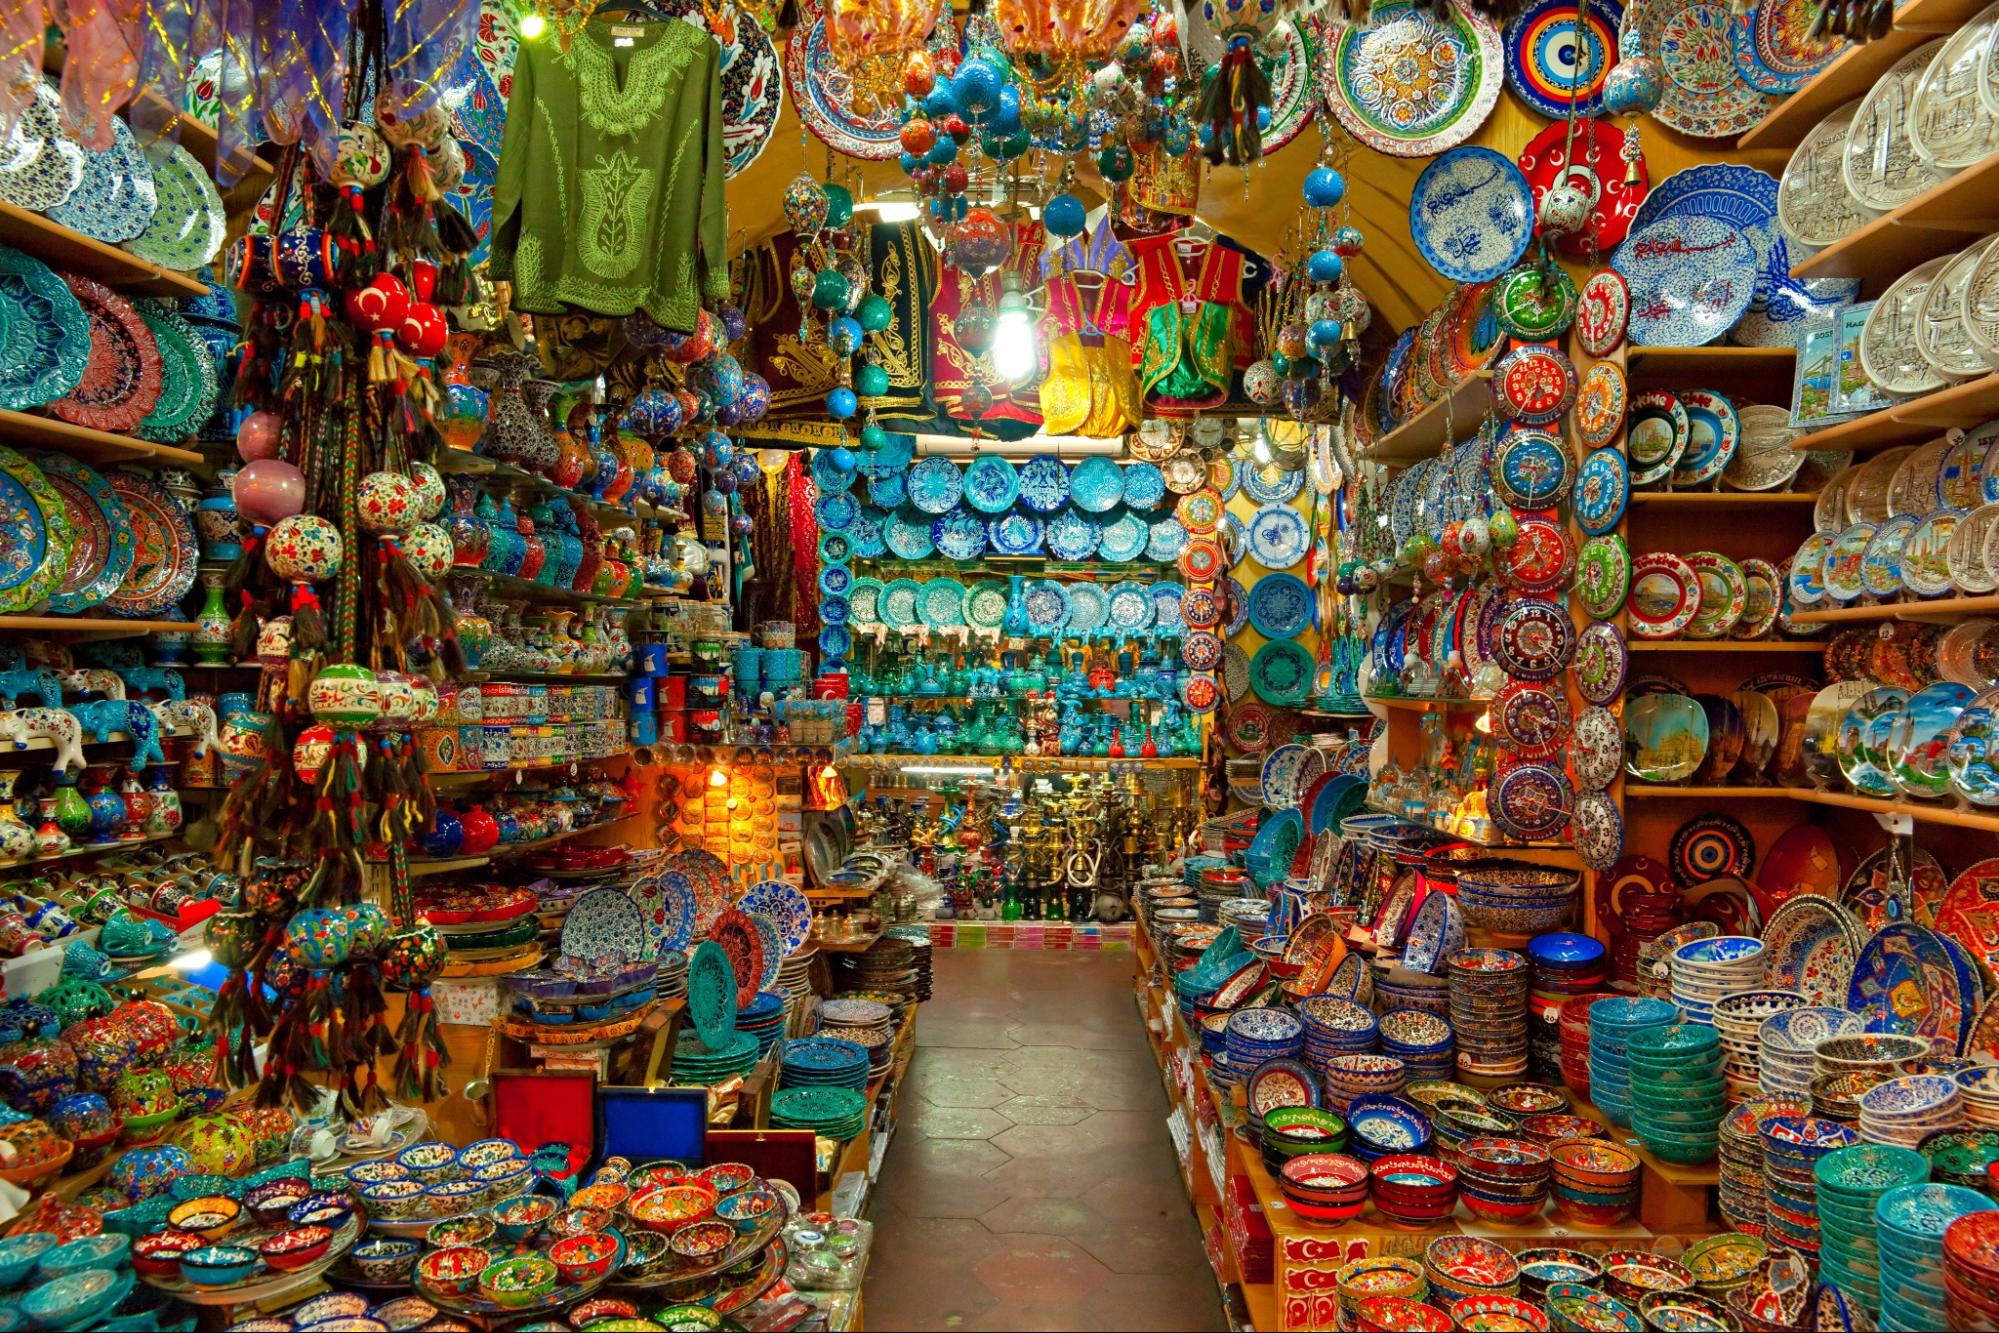 Photograph of a colorful, crowded shop full of plates, bowls, and other items